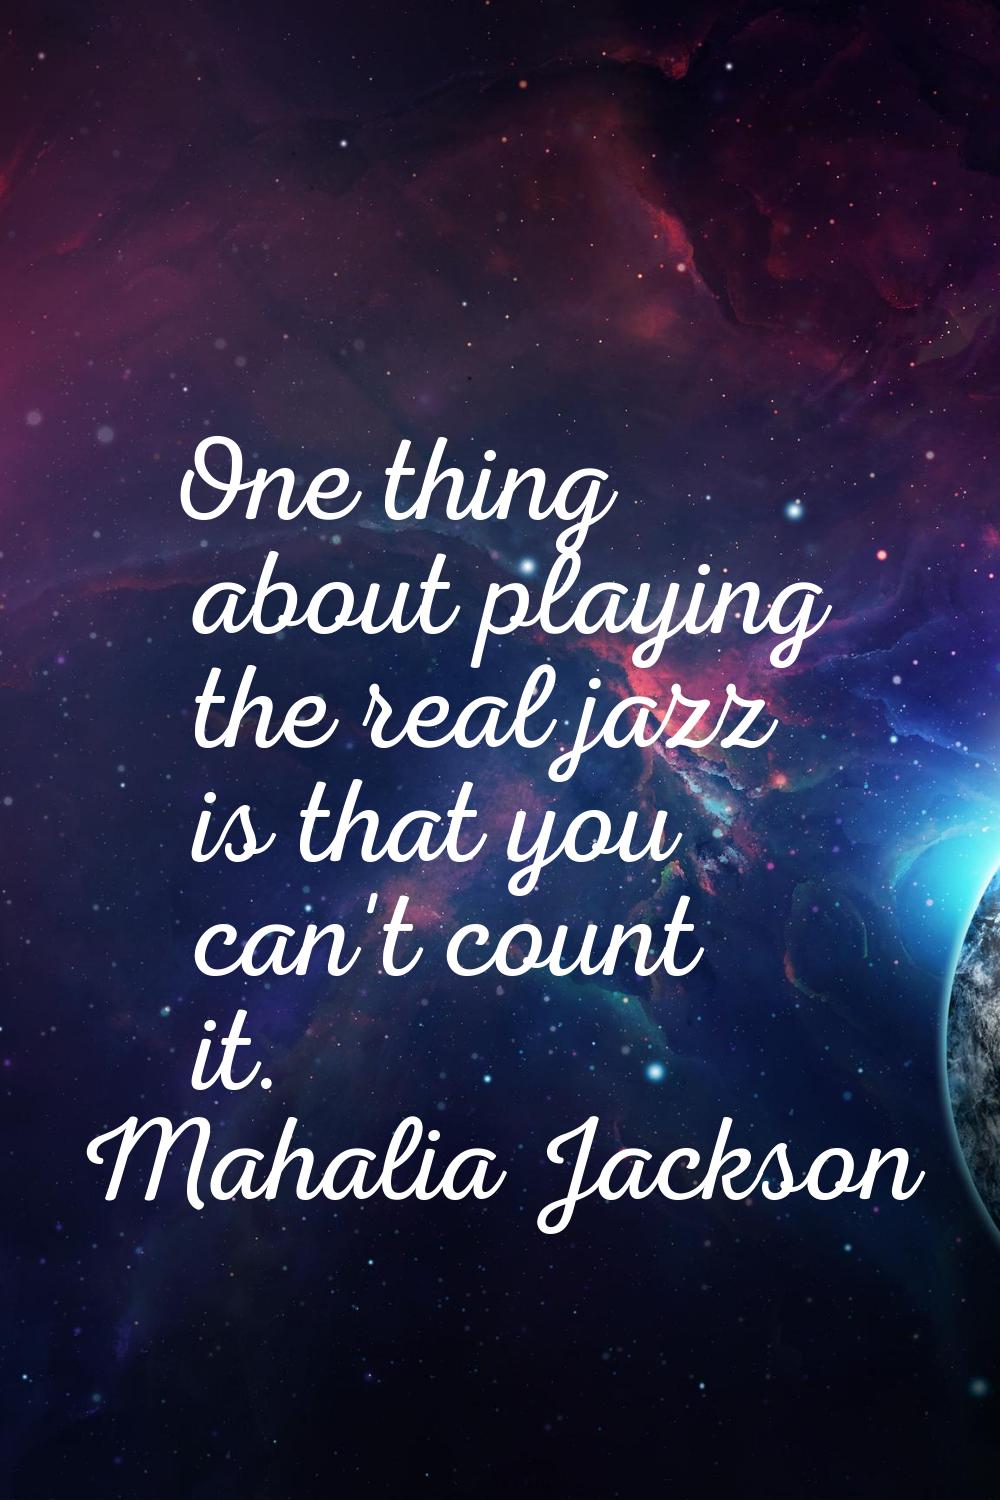 One thing about playing the real jazz is that you can't count it.